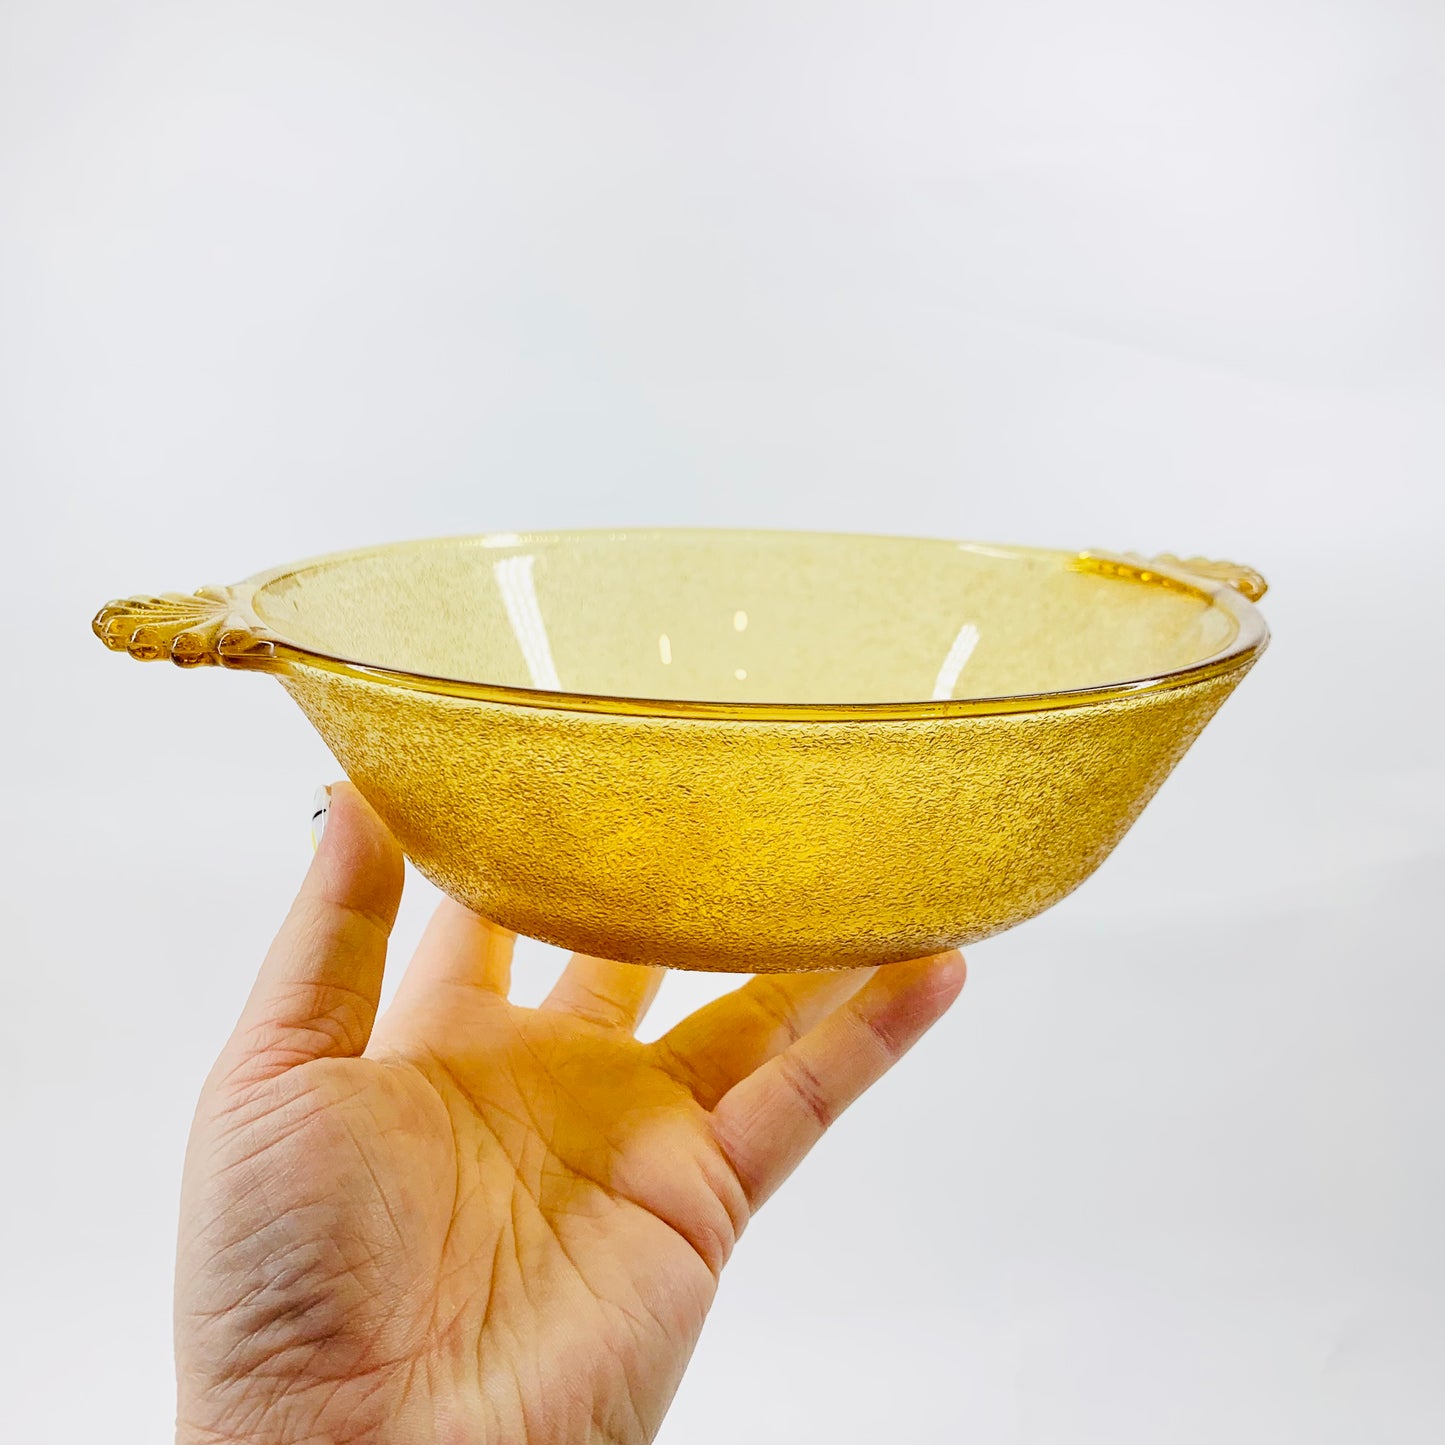 Midcentury laminated amber glass bowl with handles